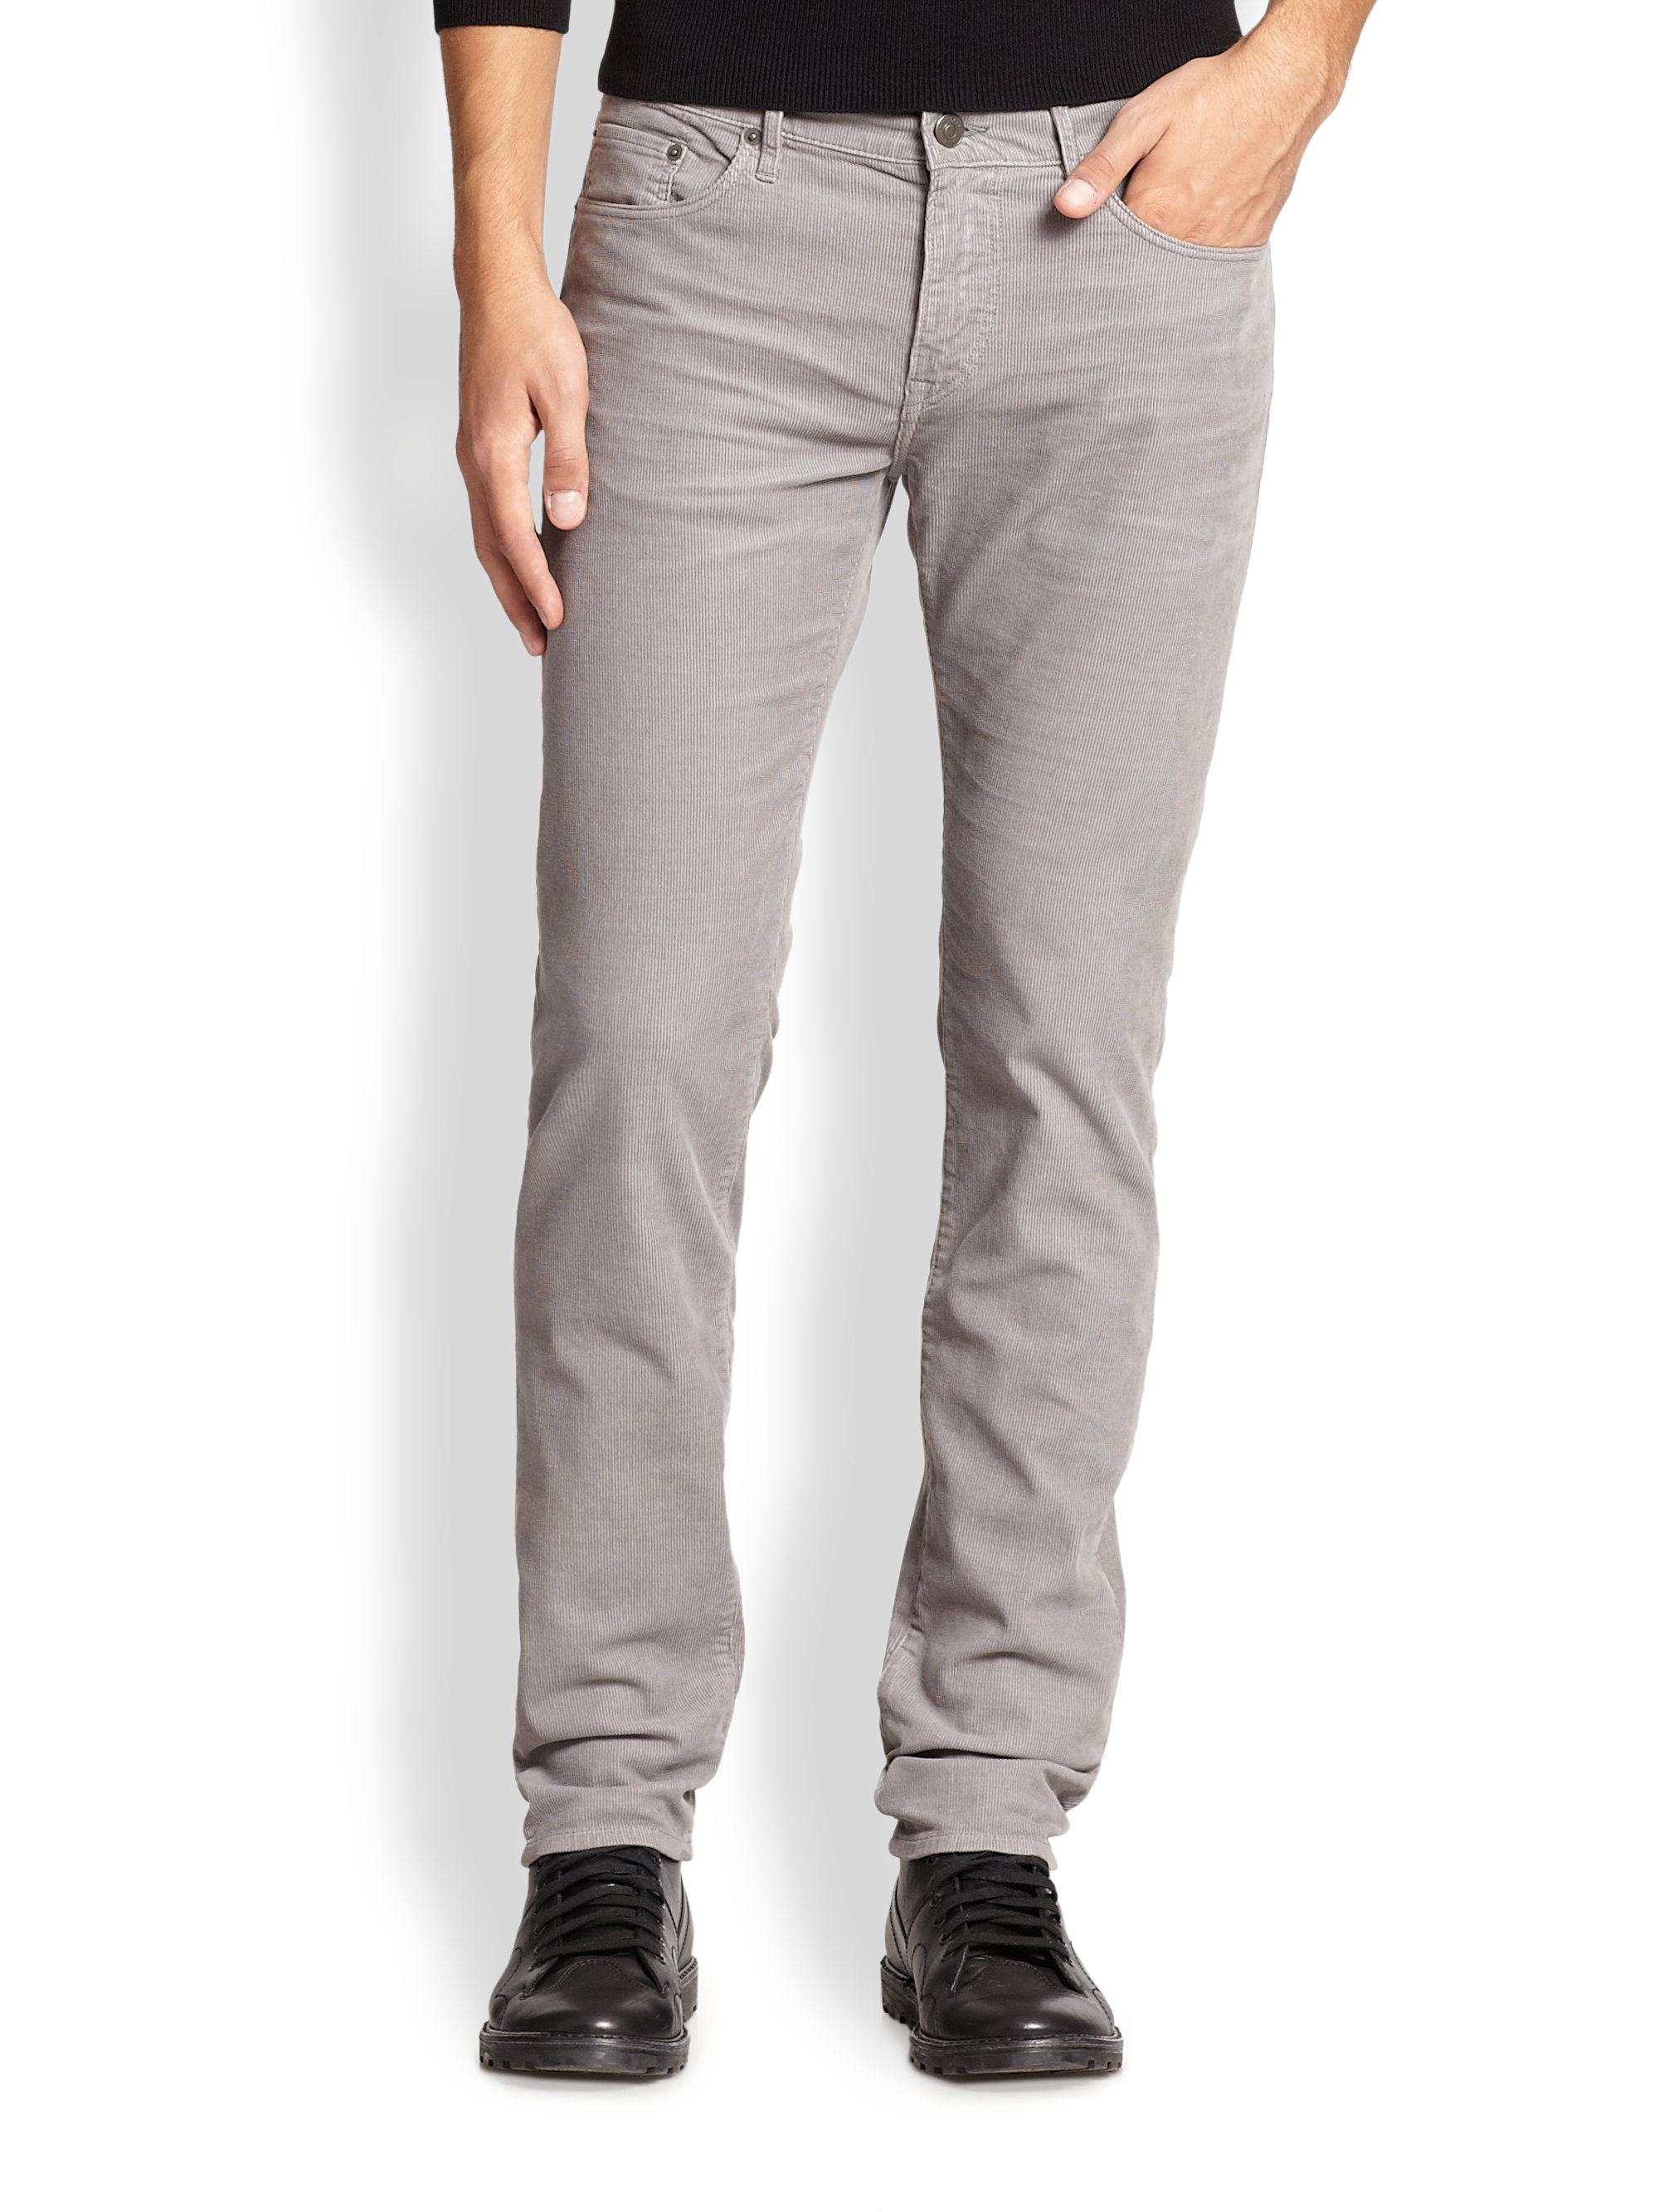 Lyst - Burberry Brit Slim-fit Jeans in Gray for Men